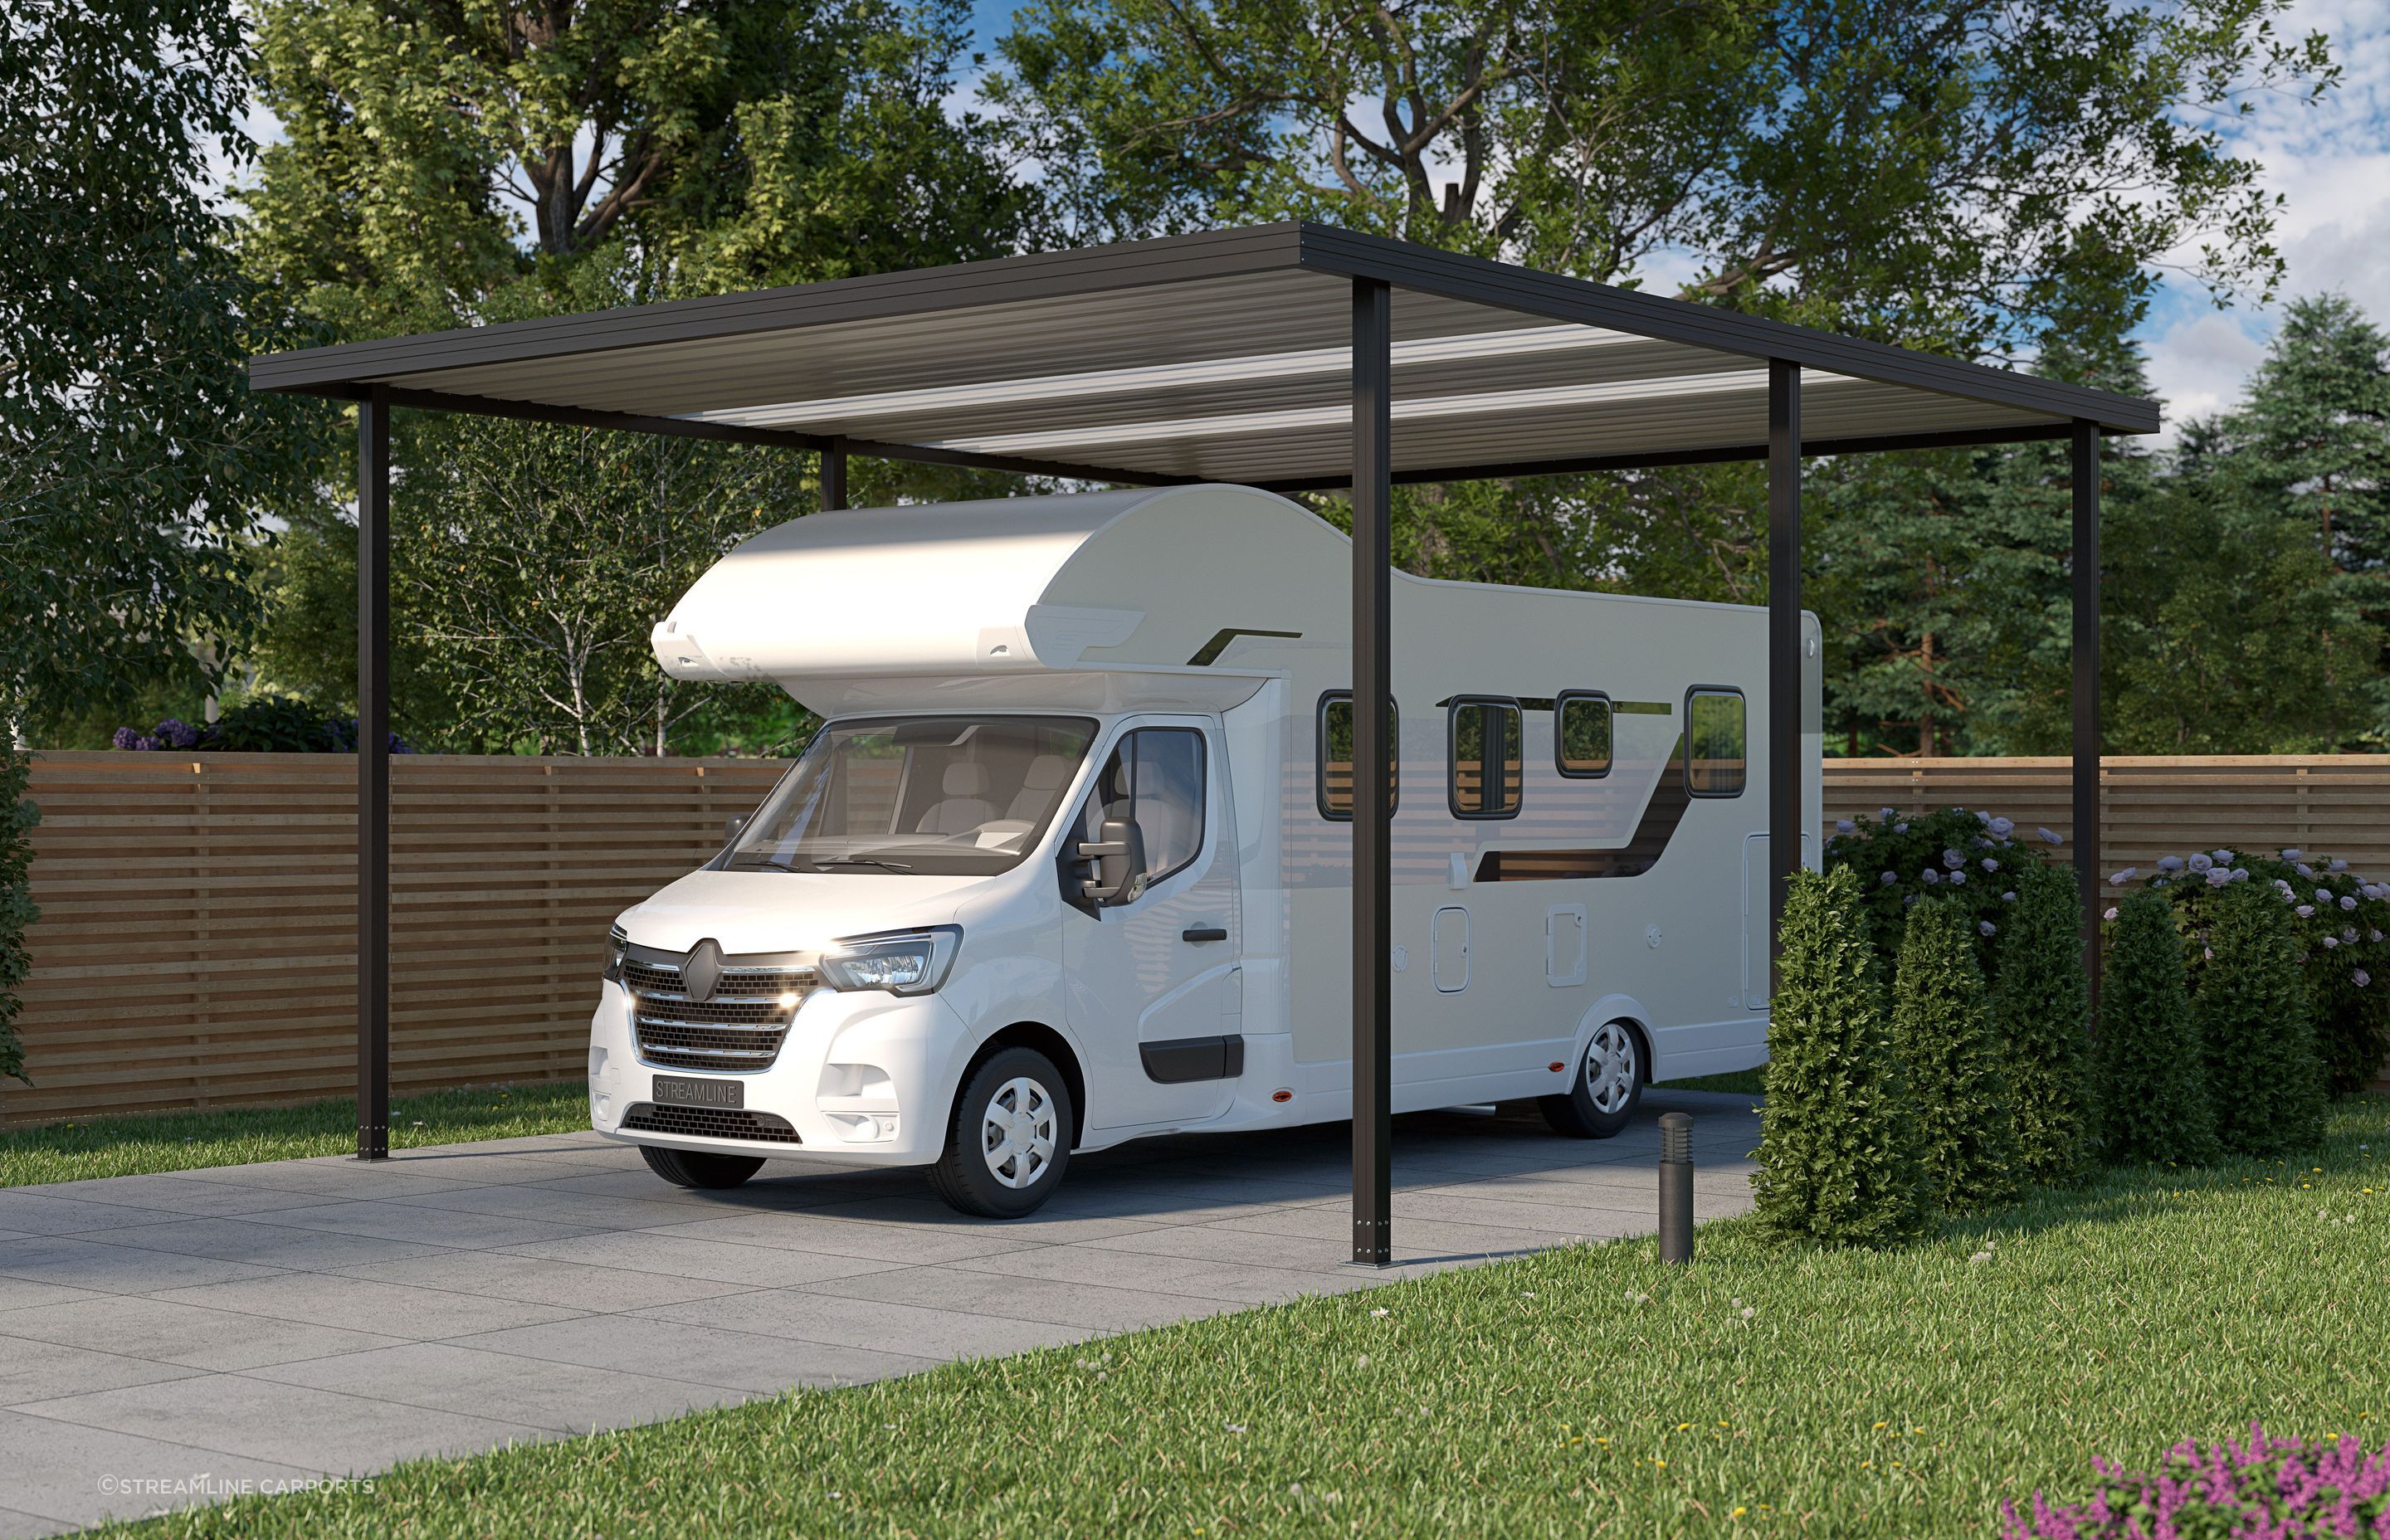 The roof of each Streamline Carport spans up to six metres without supports, making it extremely simple to construct.